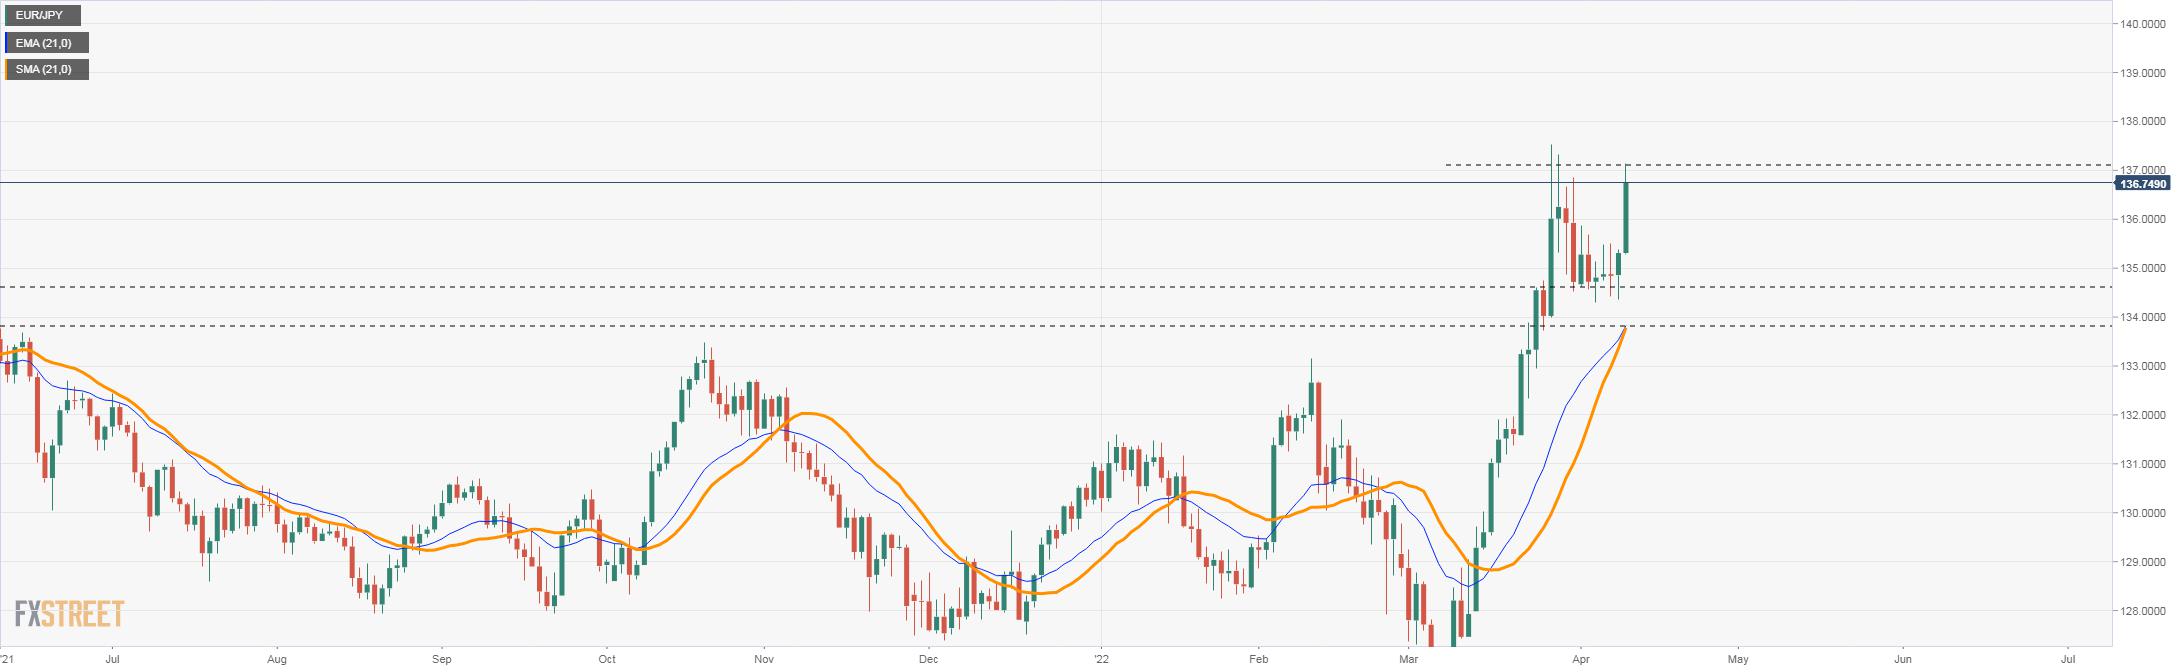 EUR/JPY jumps to highest in two weeks above 137.00